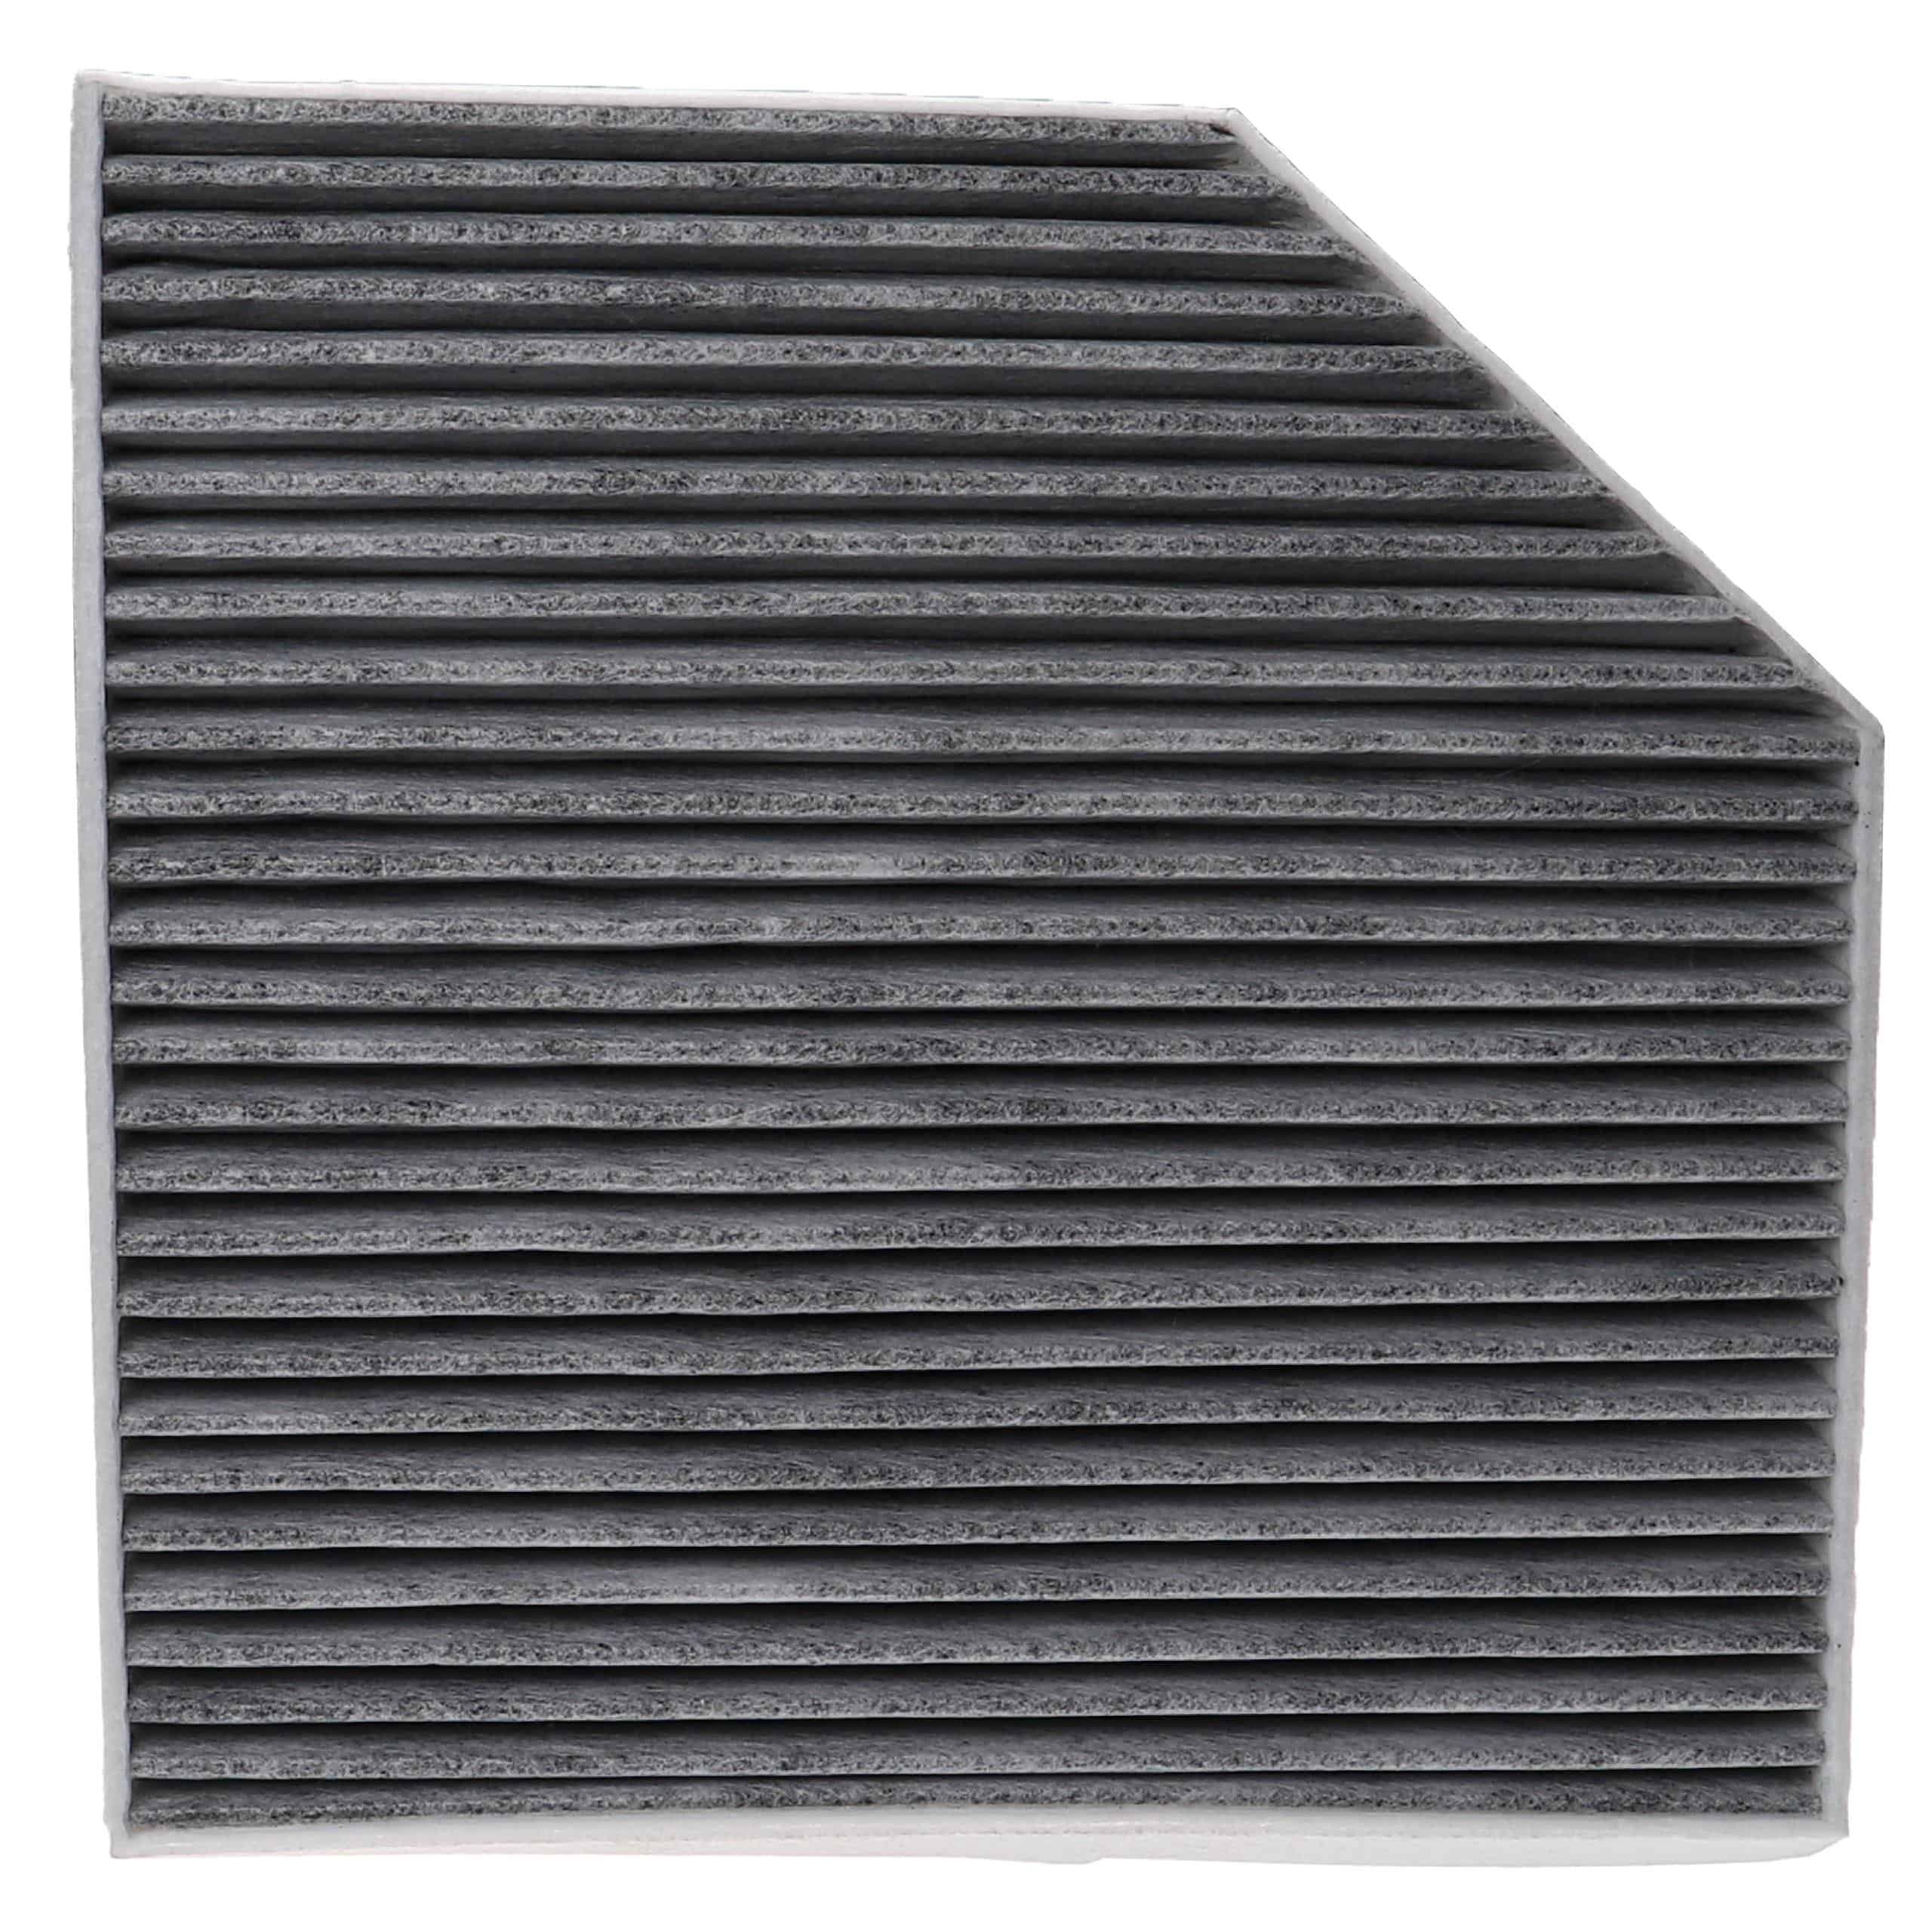 Cabin Air Filter replaces 1A First Automotive K30423 etc.